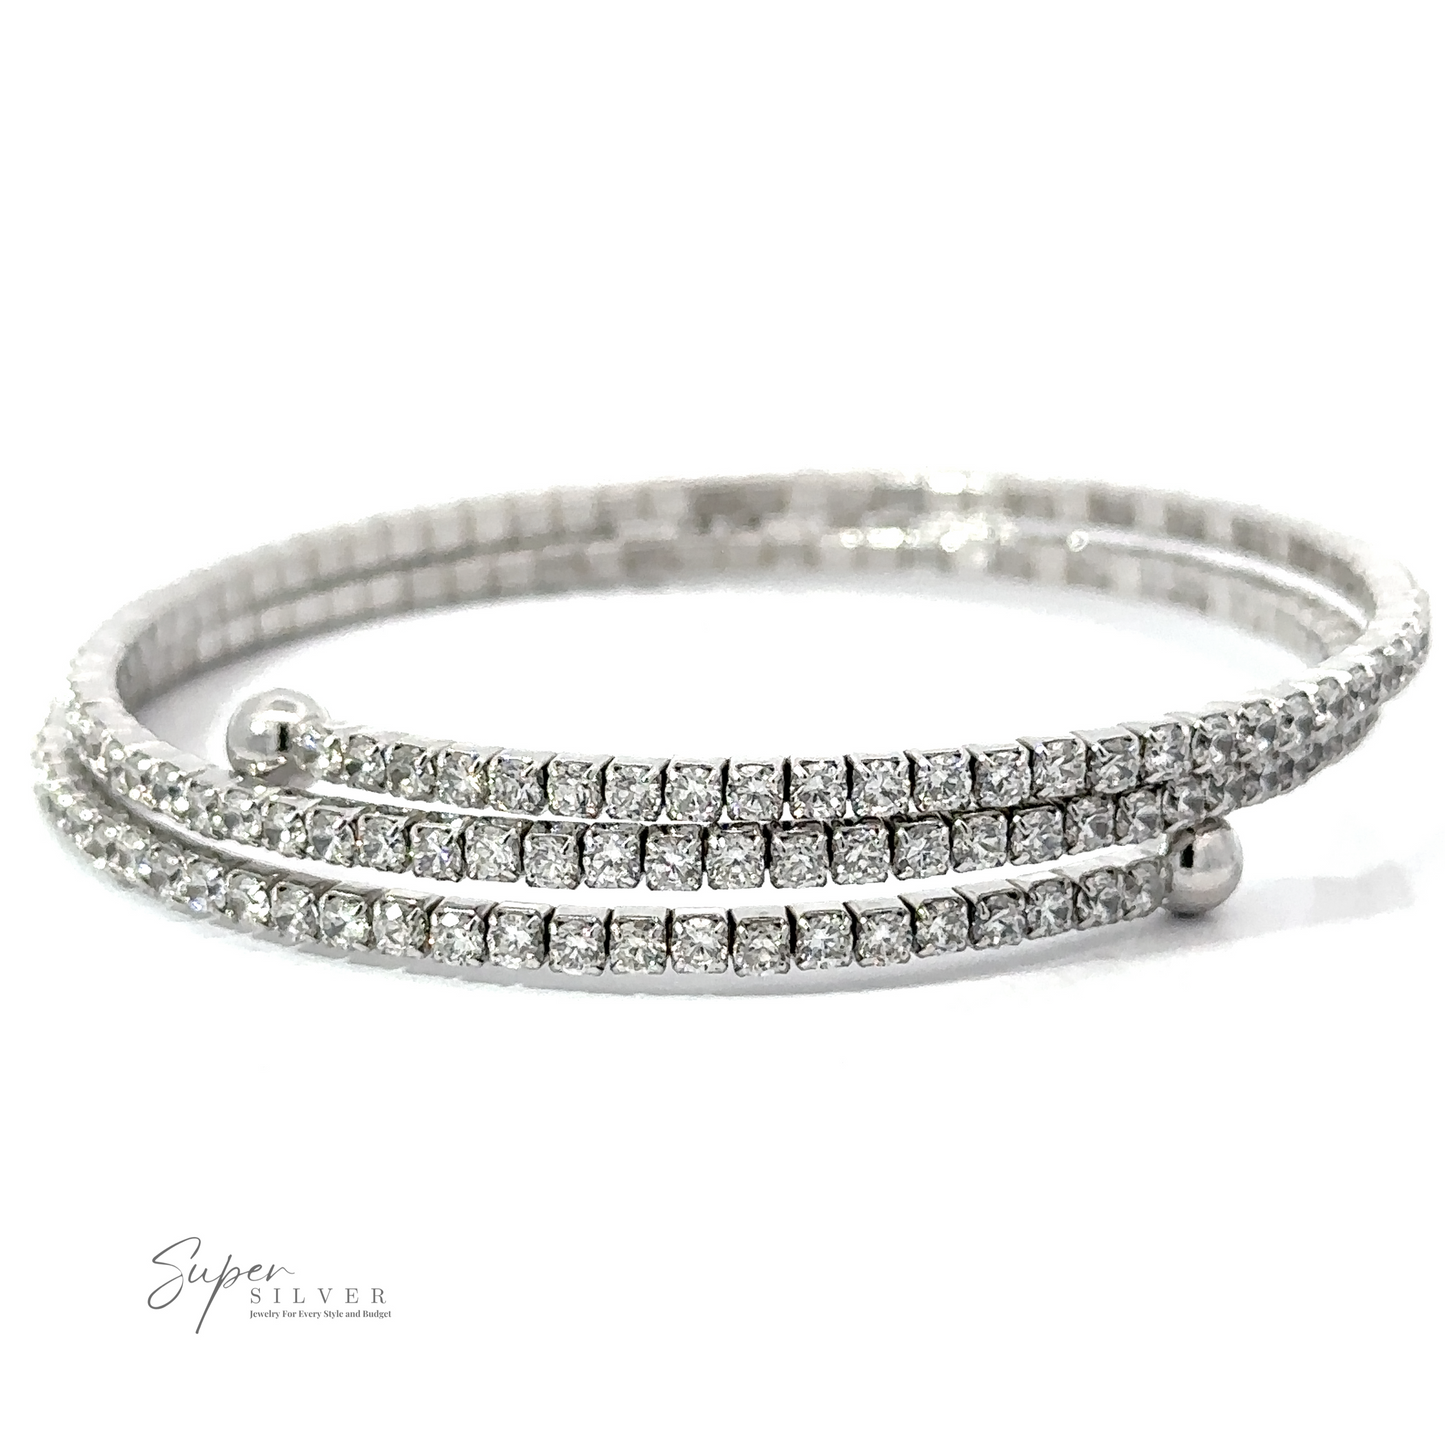 
                  
                    A sparkling silver bracelet with multiple rows of small square-cut Cubic Zirconia. The logo "Super Silver" is visible in the lower-left corner, and it's crafted from Rhodium Plated .925 Sterling Silver for lasting brilliance. The Cubic Zirconia Simple Wrap Bracelet adds a touch of elegance to any outfit.
                  
                